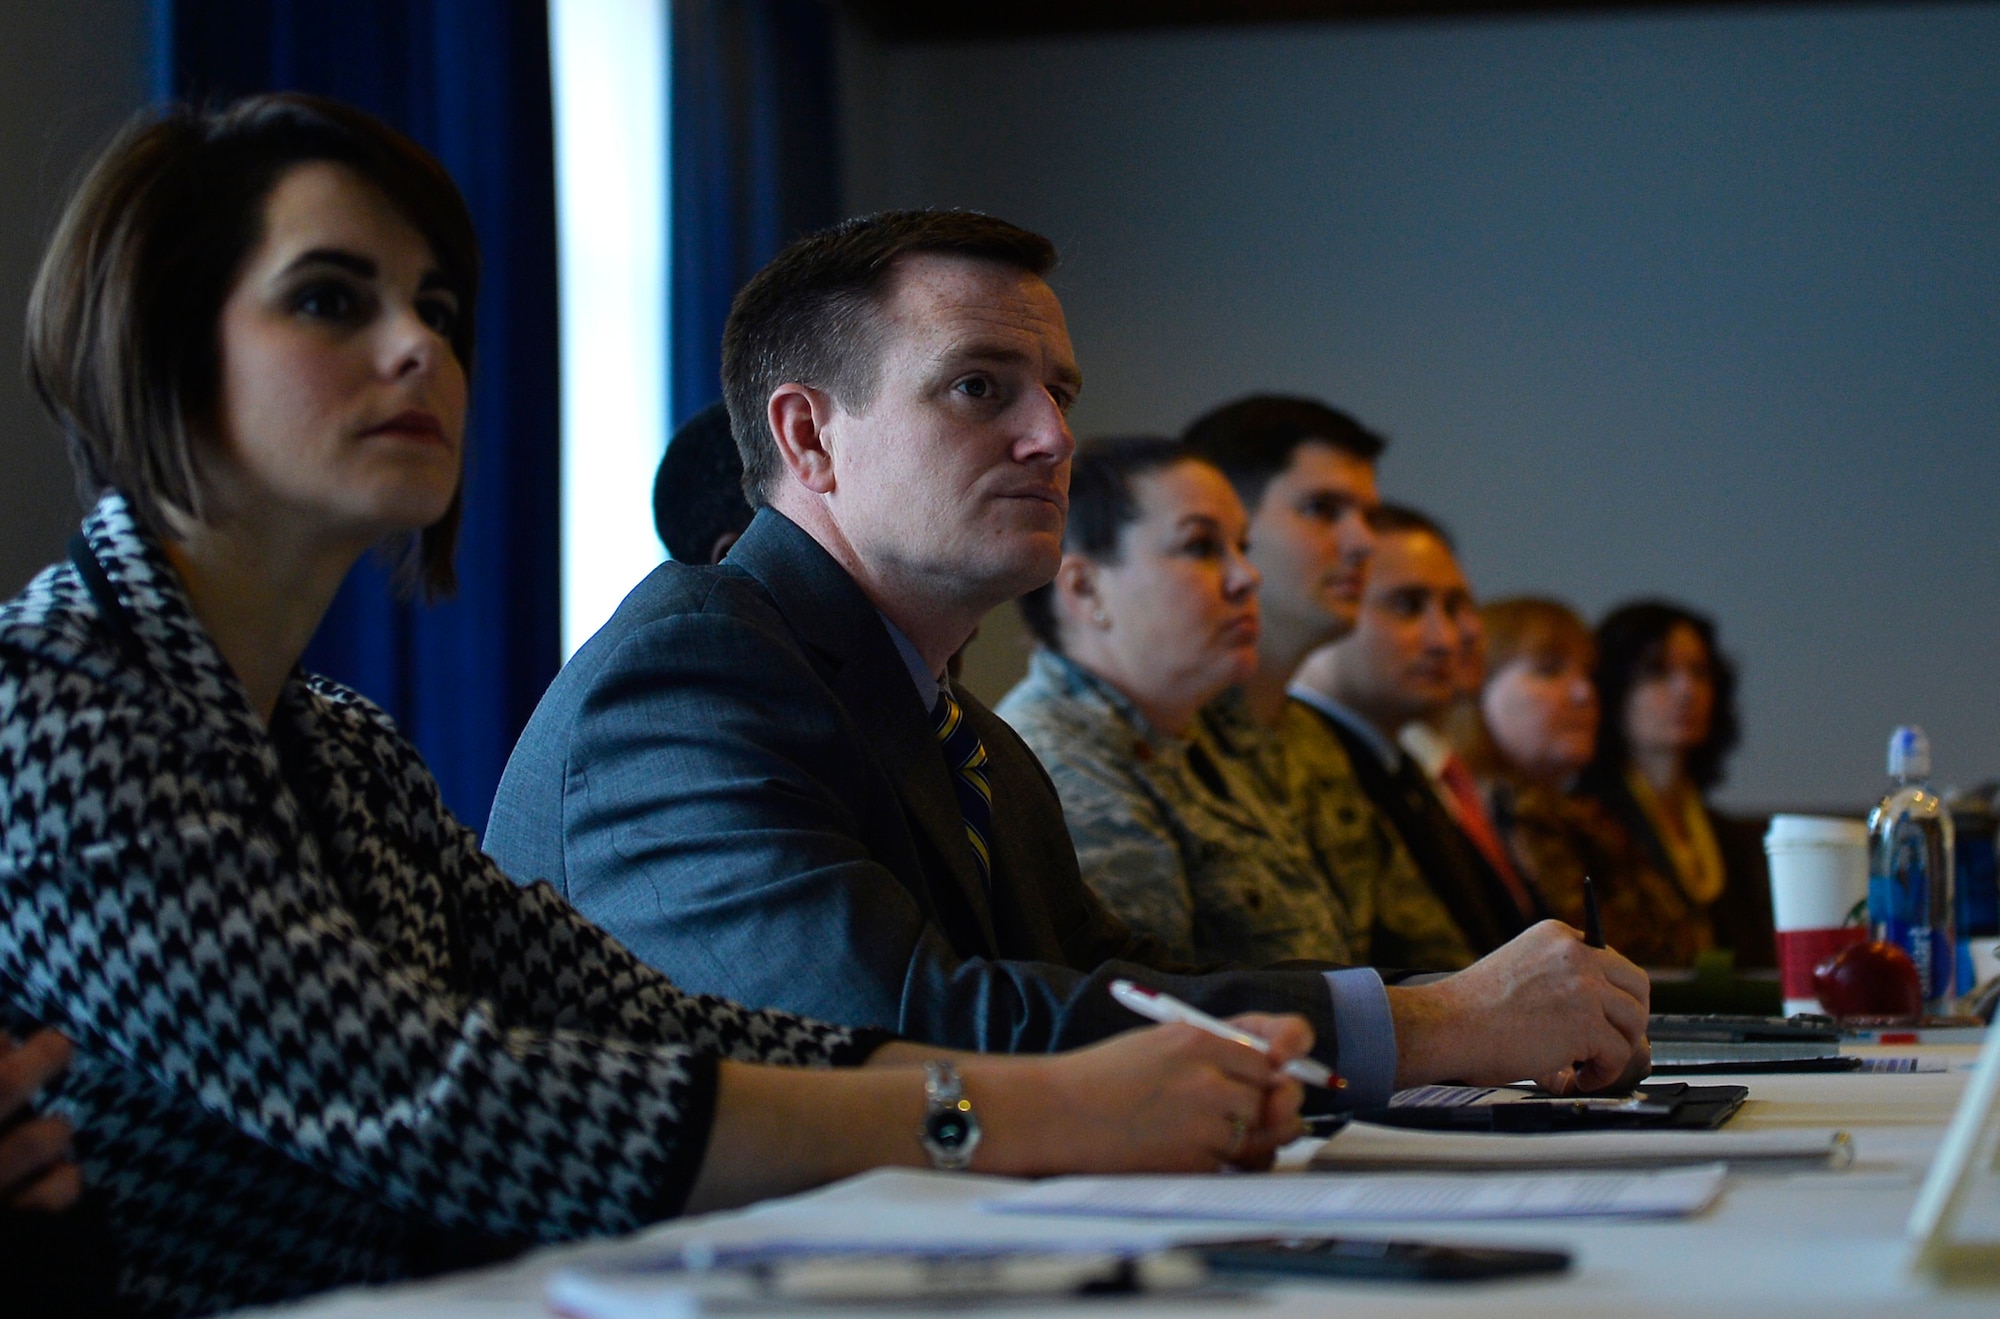 Military and civilian defense contracting representatives attend a meeting at Ramstein Air Base, Germany, Jan. 24, 2017, to discuss ways to procure supplies more efficiently. The meeting emphasized the importance of cooperation between contracting agencies from all branches of the U.S. military. (U.S. Air Force photo by Airman 1st Class Joshua Magbanua).